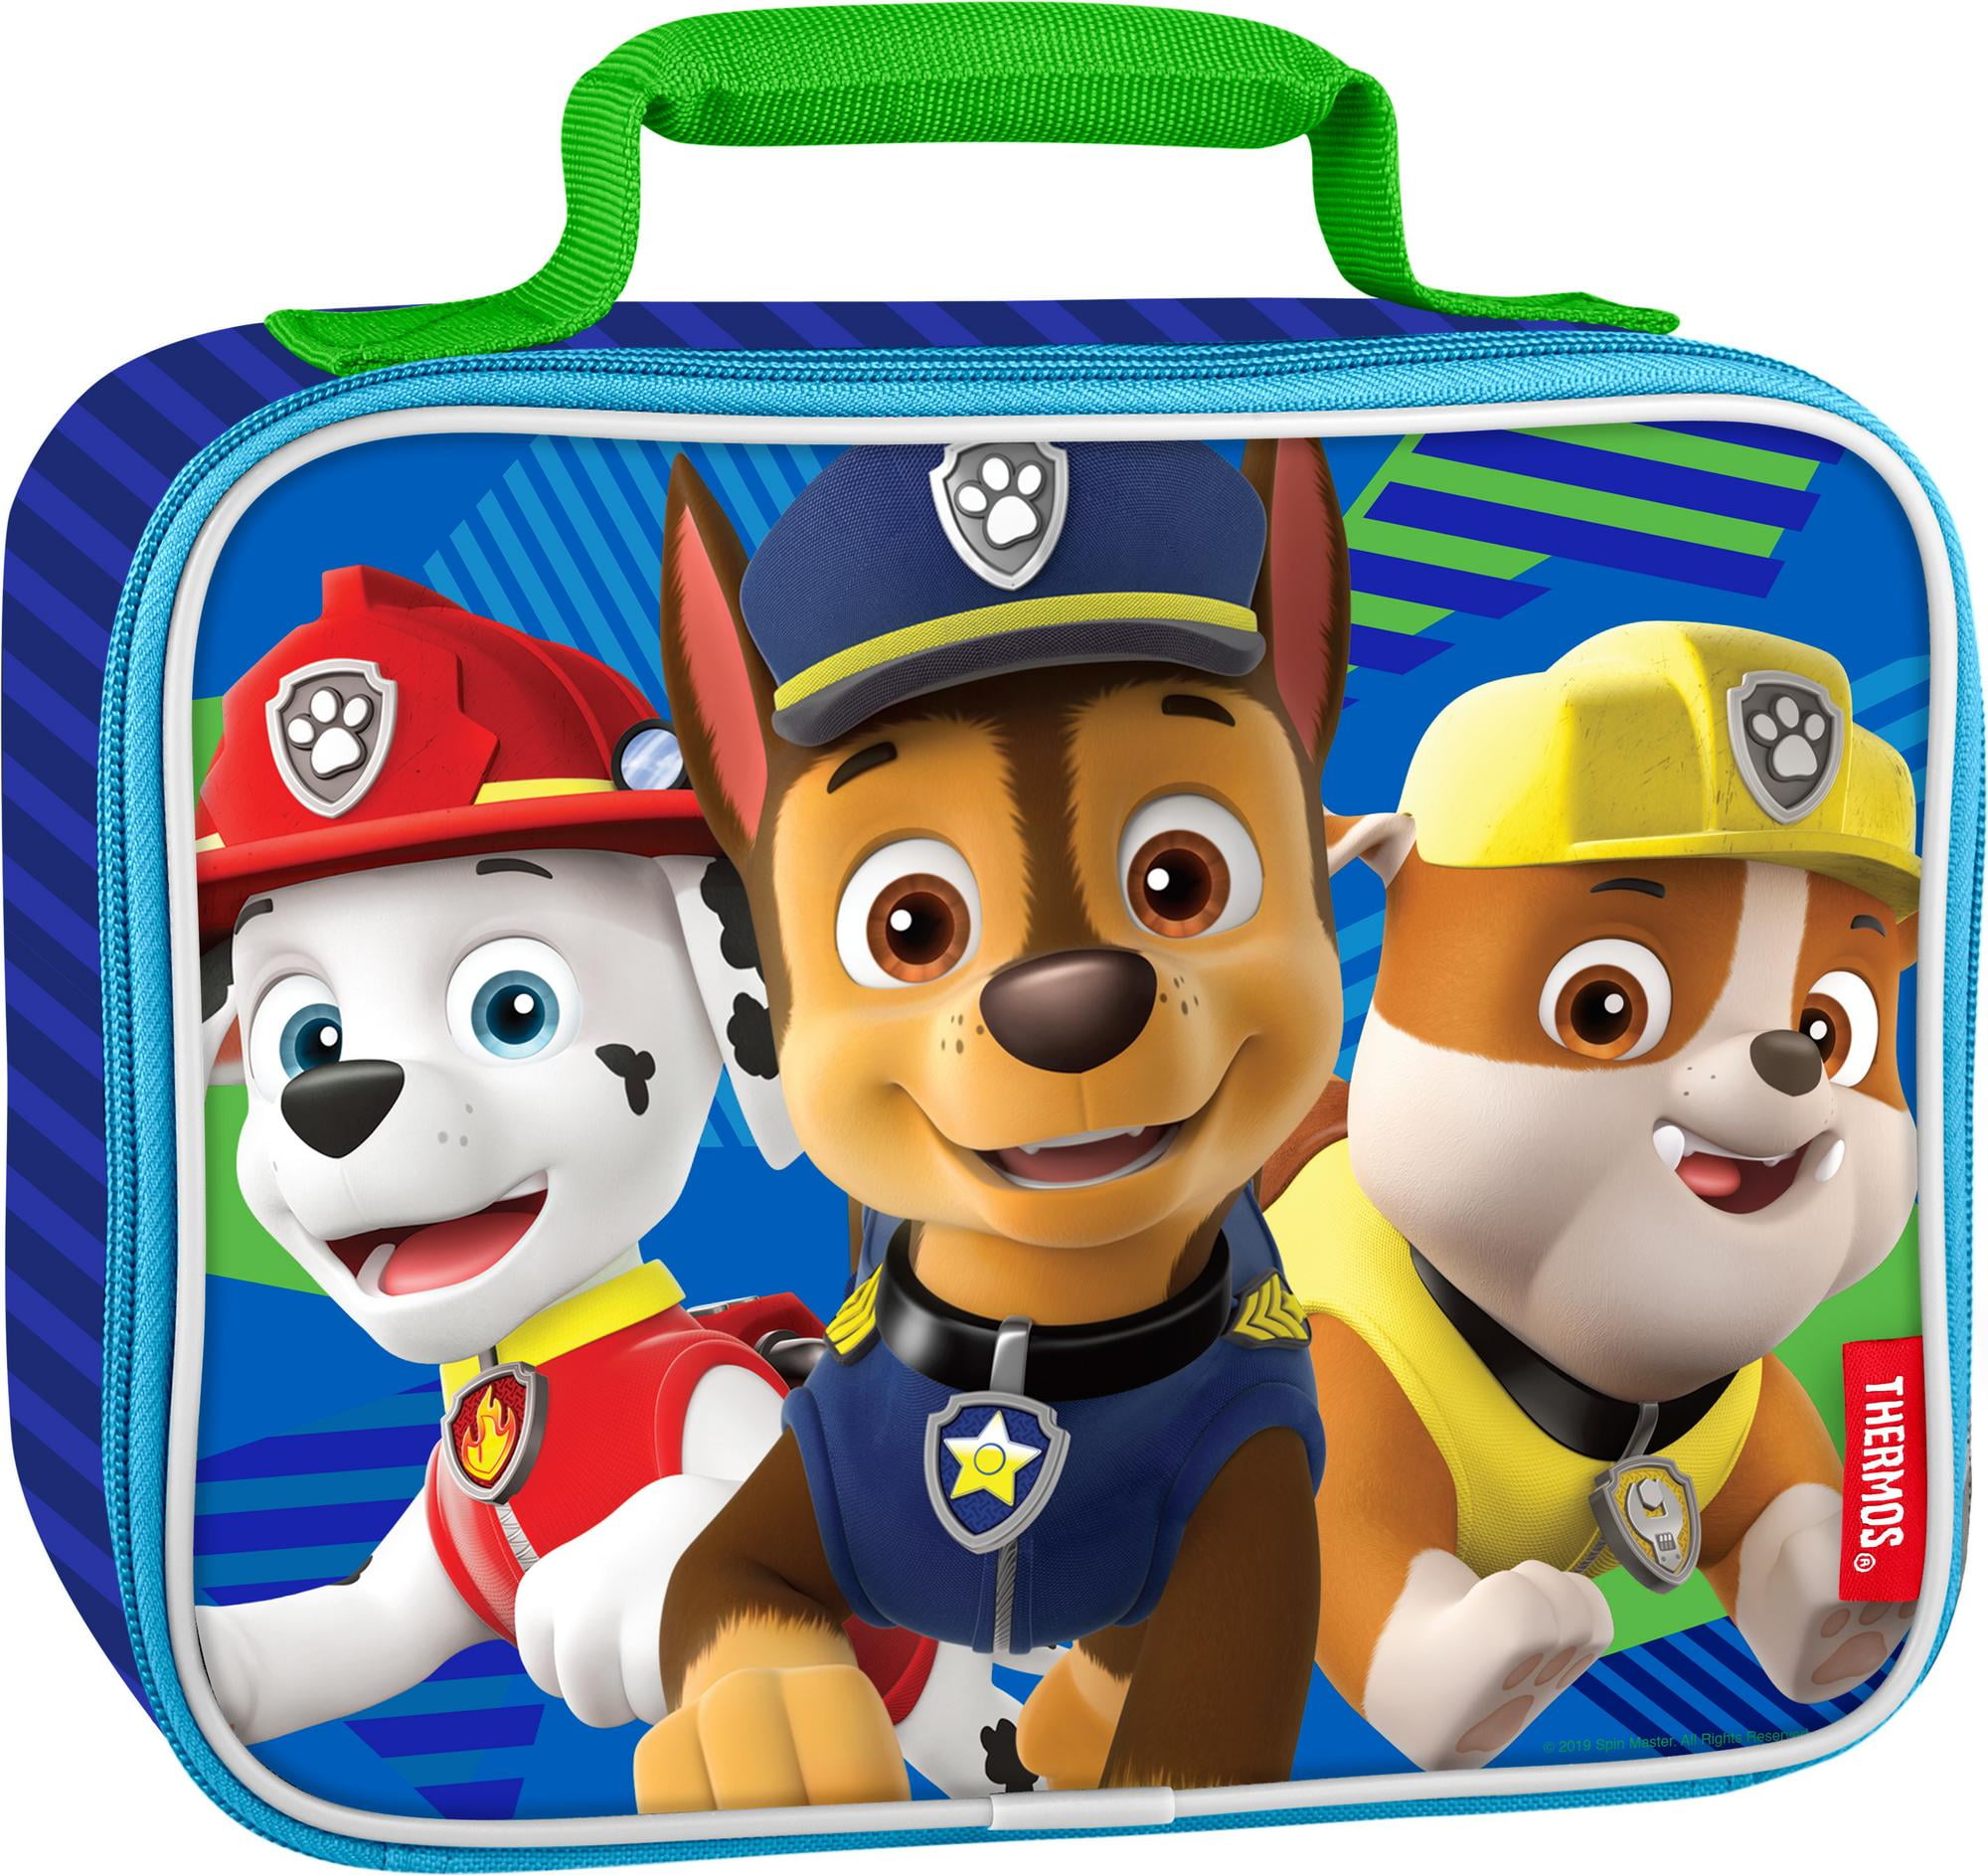 Thermos Kids Insulated Reusable Single Compartment Lunch Bag, Paw Patrol